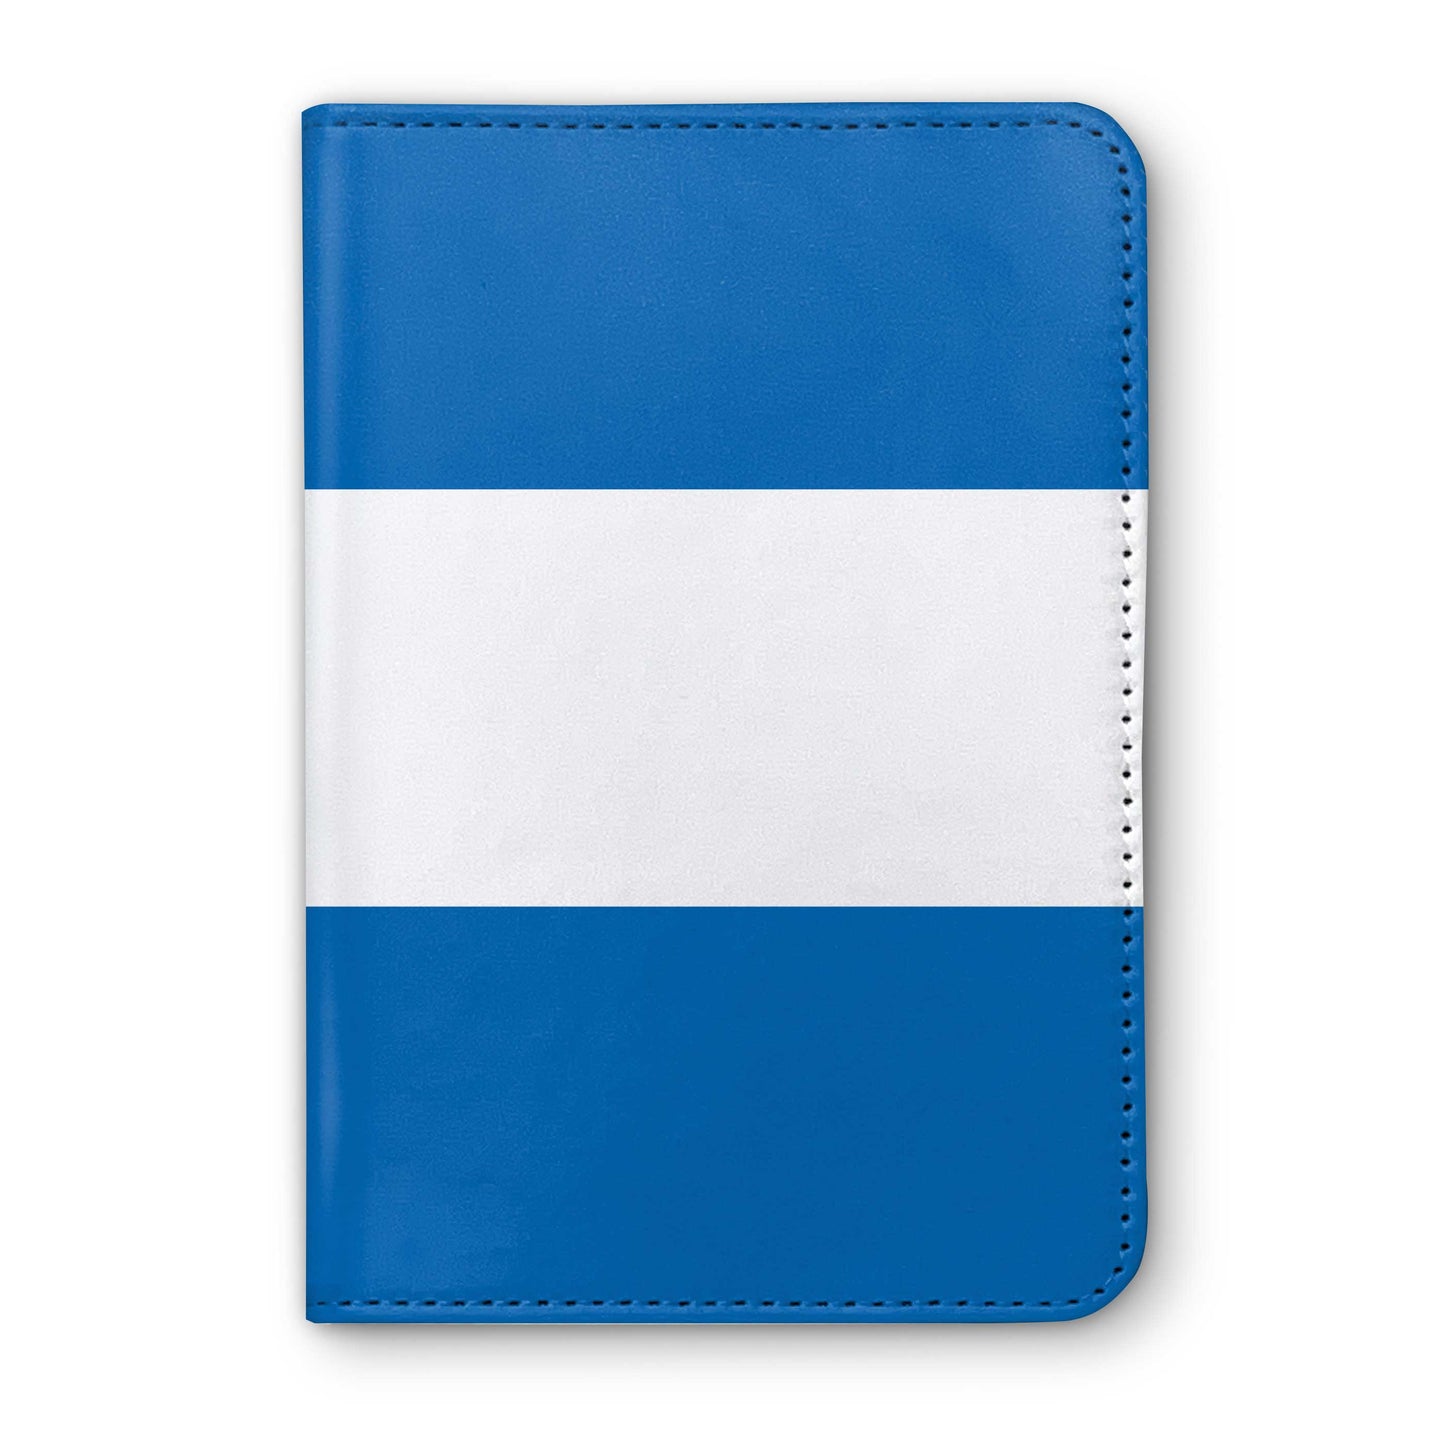 Rory L Larkin Horse Racing Passport Holder - Hacked Up Horse Racing Gifts